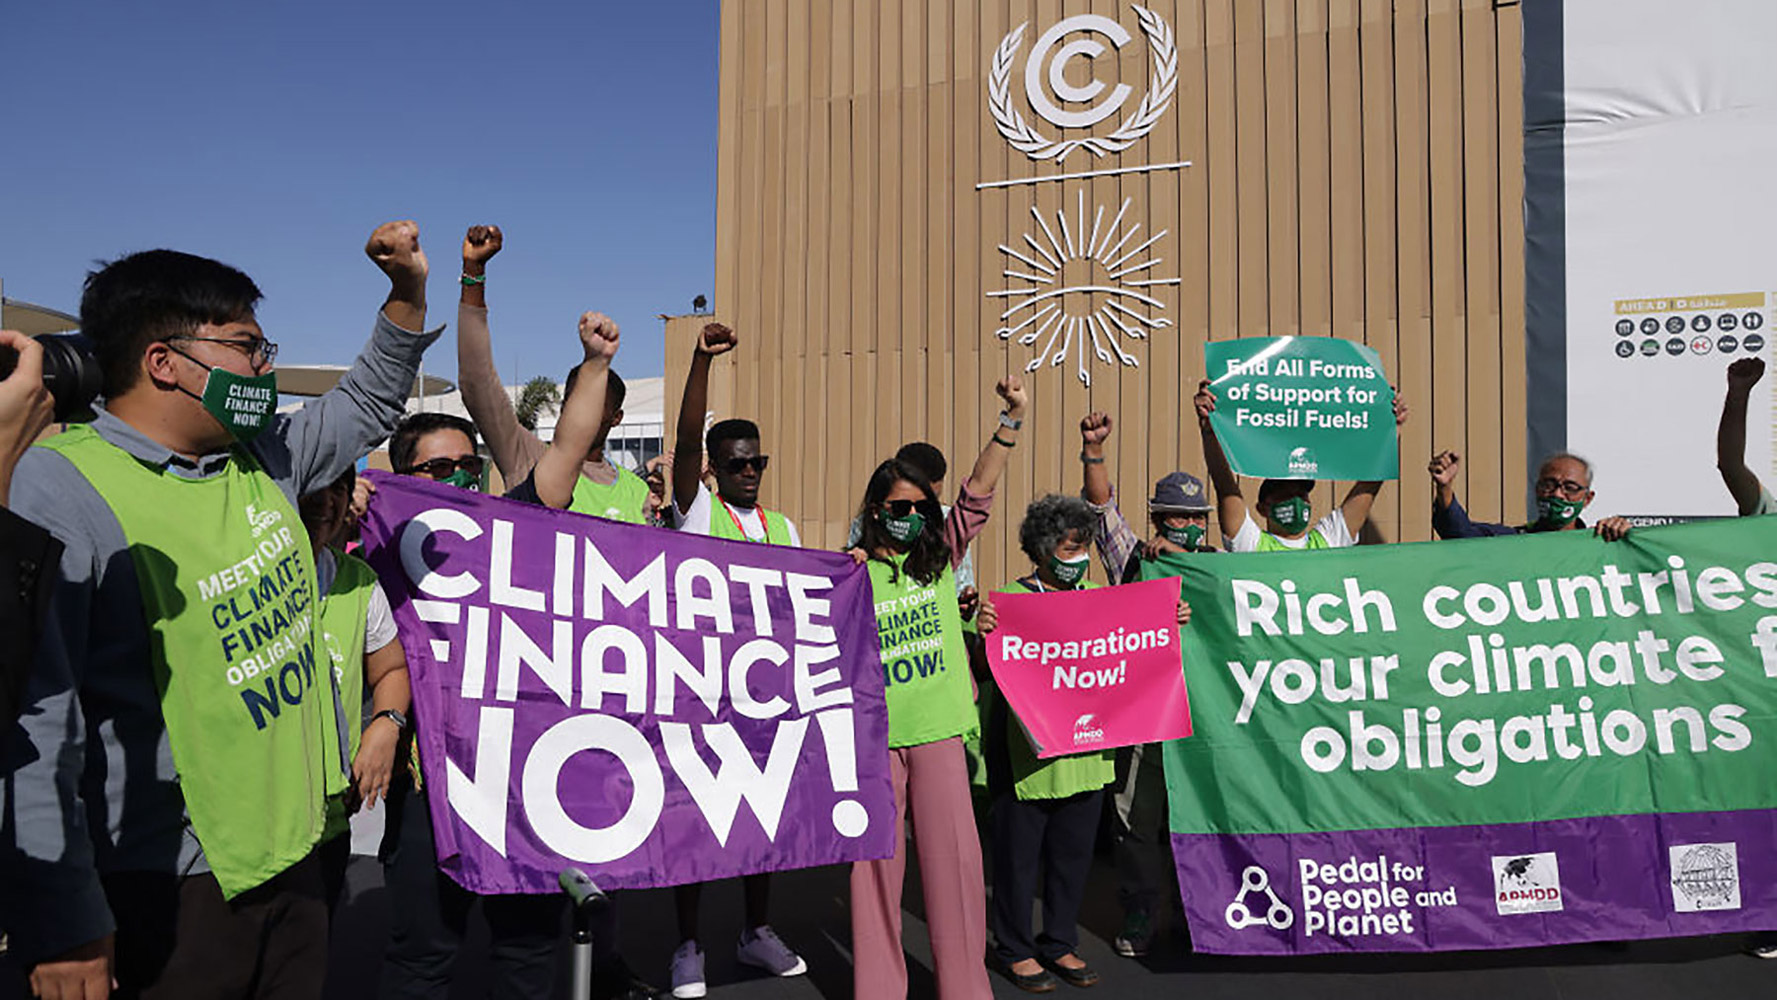 At COP27 activists demanded climate finance and debt relief